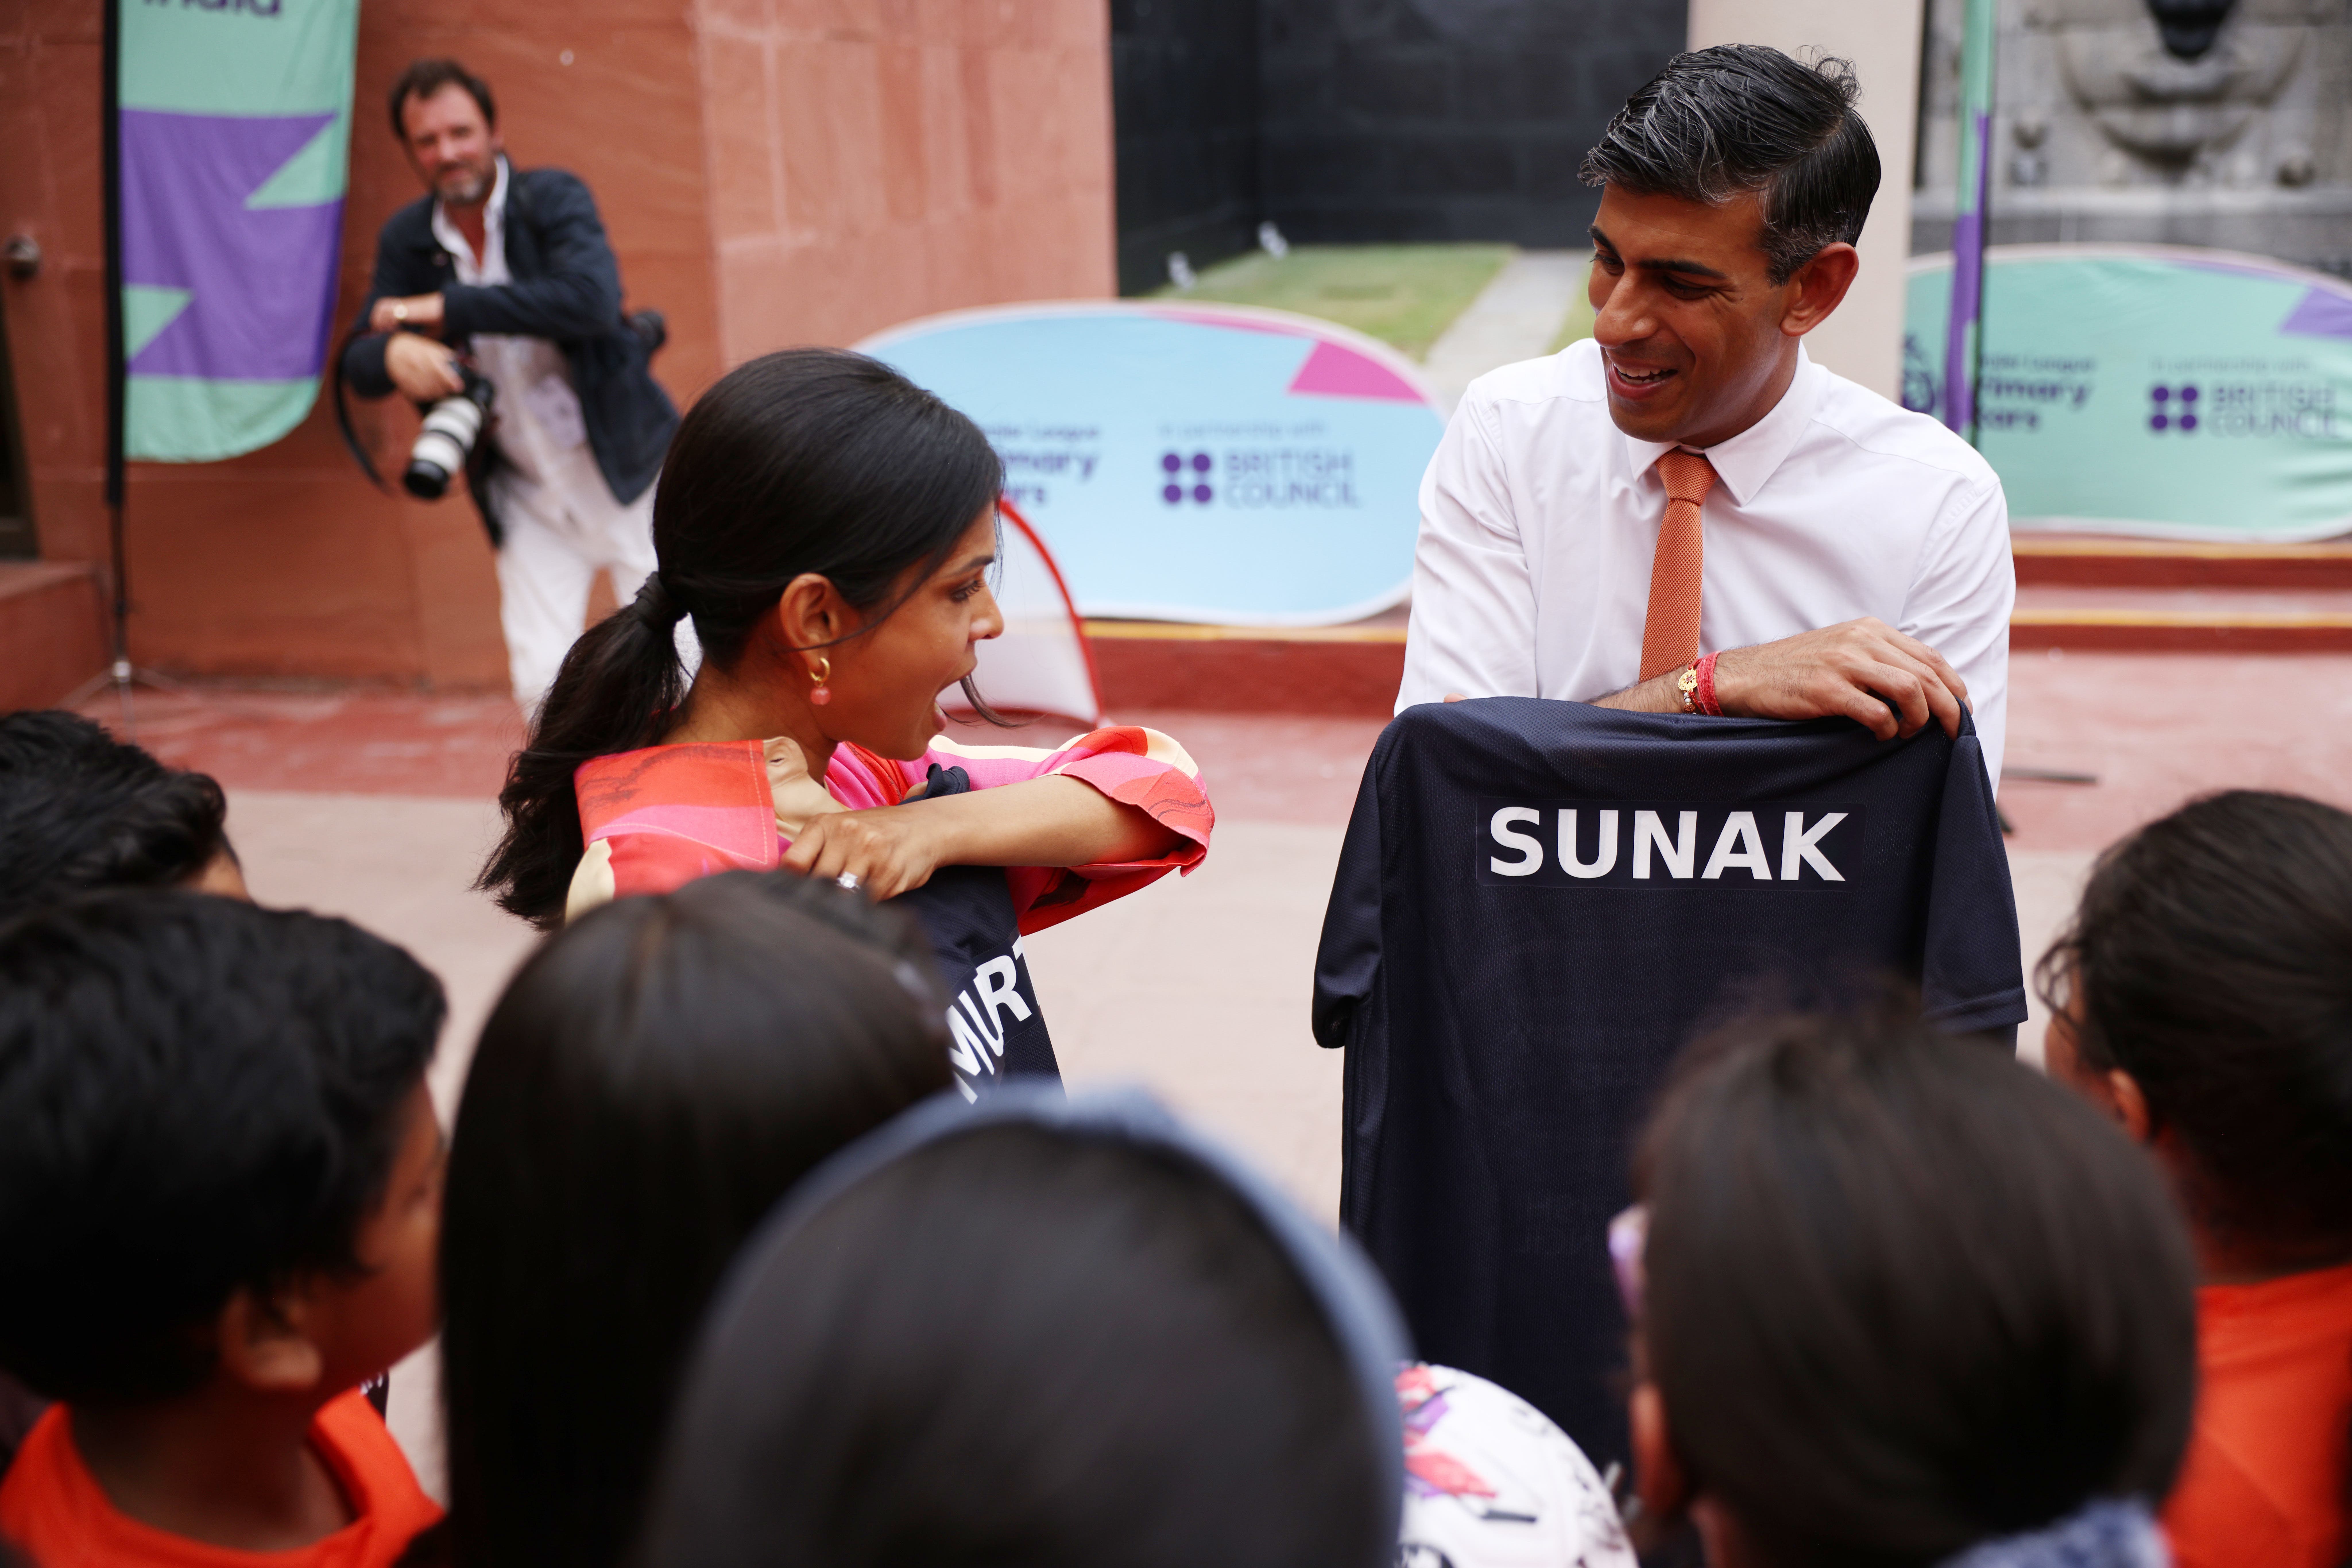 Prime Minister Rishi Sunak and his wife Akshata Murty meet local schoolchildren at the British Council during an official visit ahead of the G20 Summit in New Delhi, India (Dan Kitwood/PA)